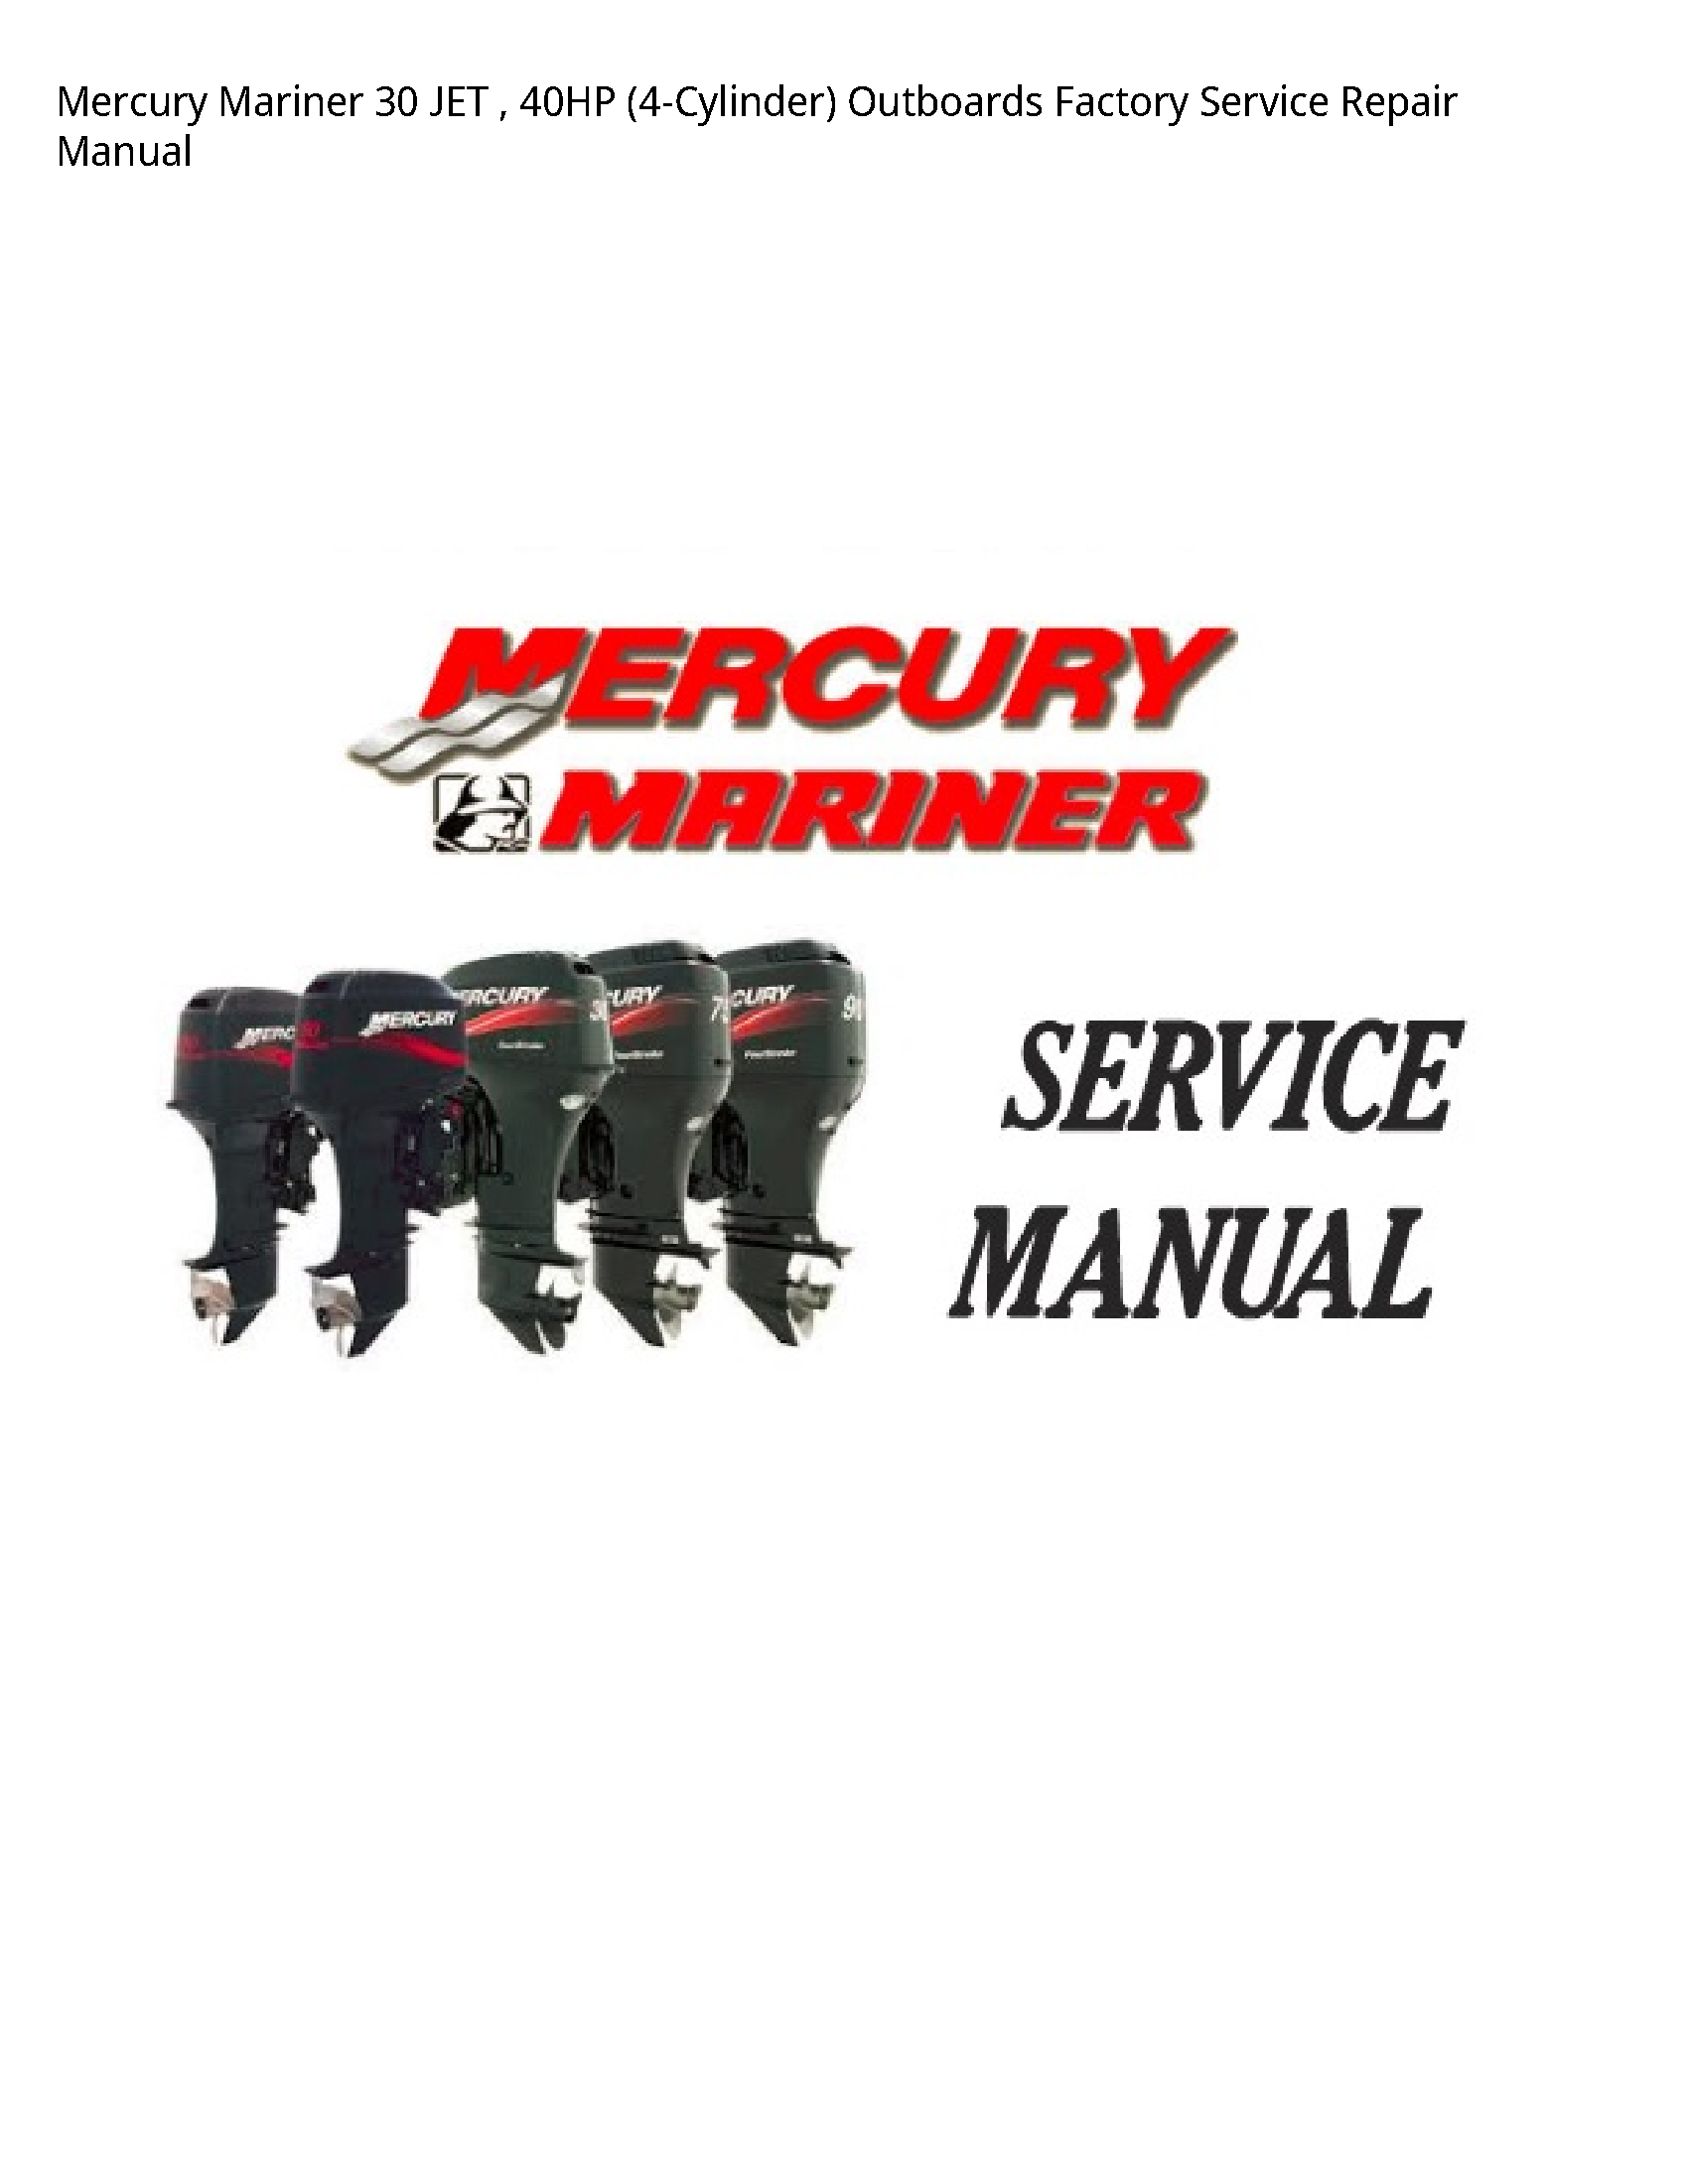 Mercury Mariner 30 JET Outboards Factory manual